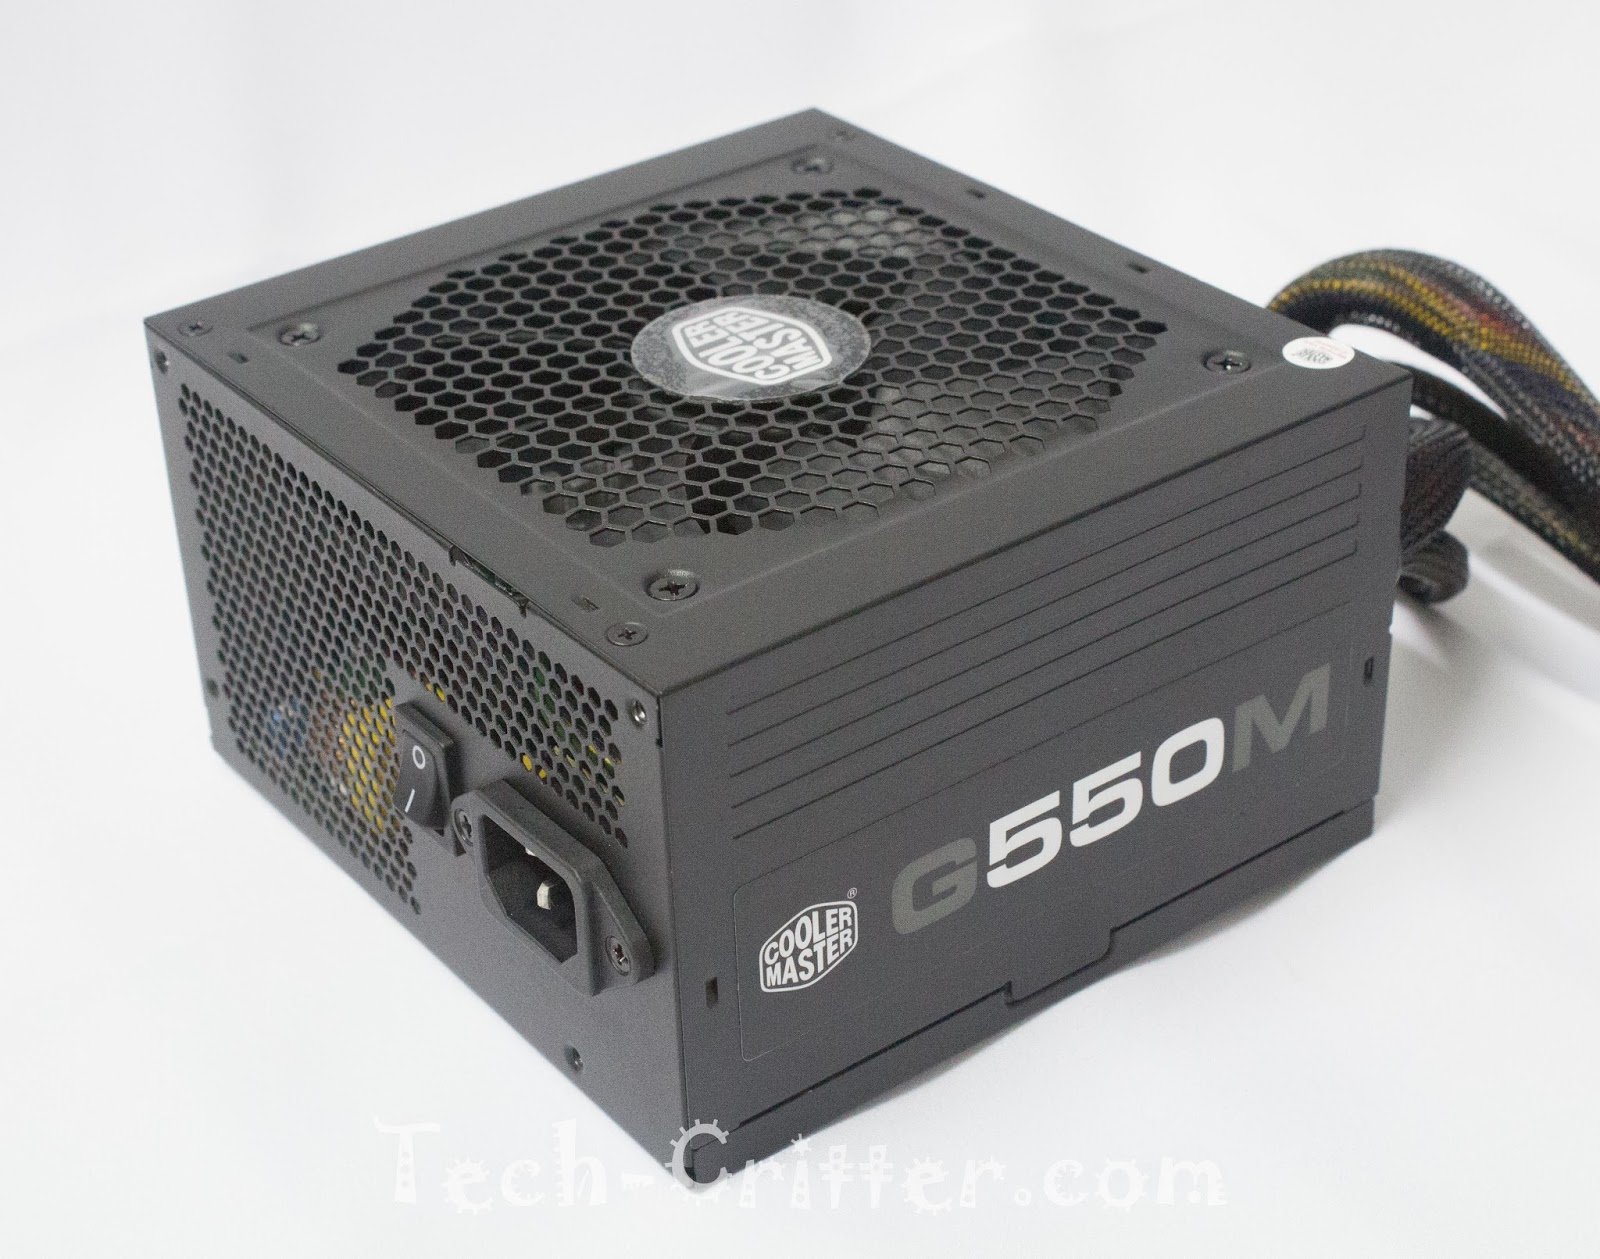 Cooler Master G550M Power Supply Unit Unboxing and Overview 14